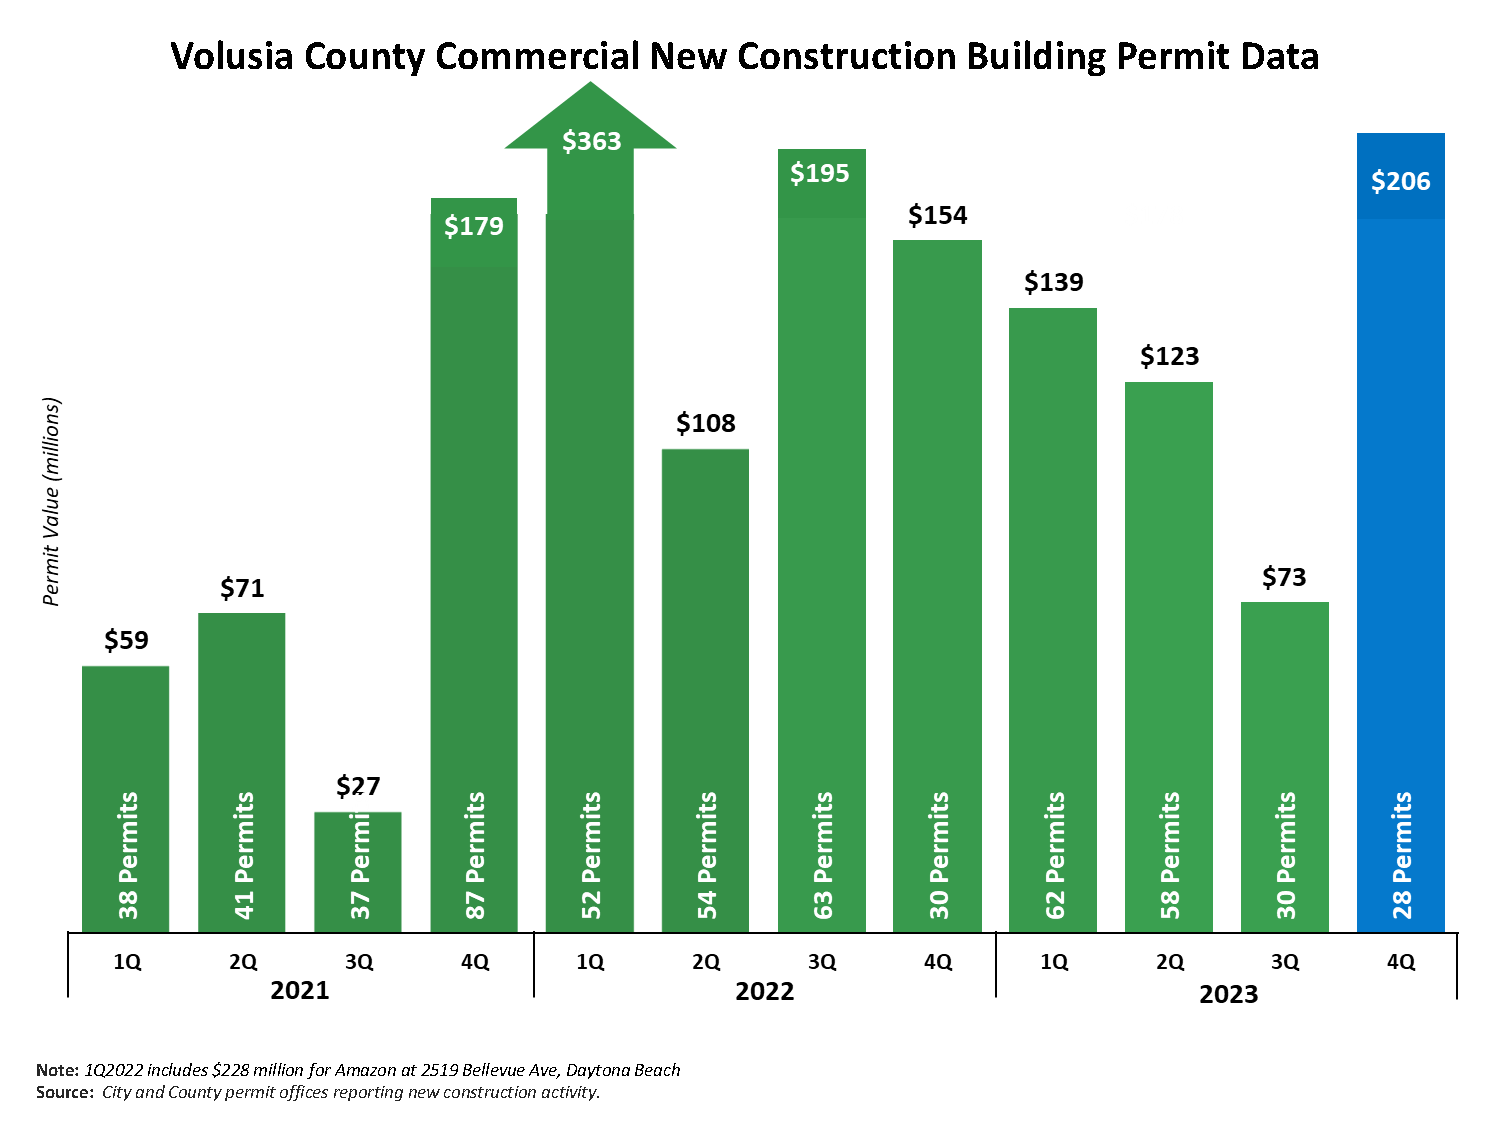 Chart showing the 12 most recent quarters of commercial new construction building permit activity ending March 2023.